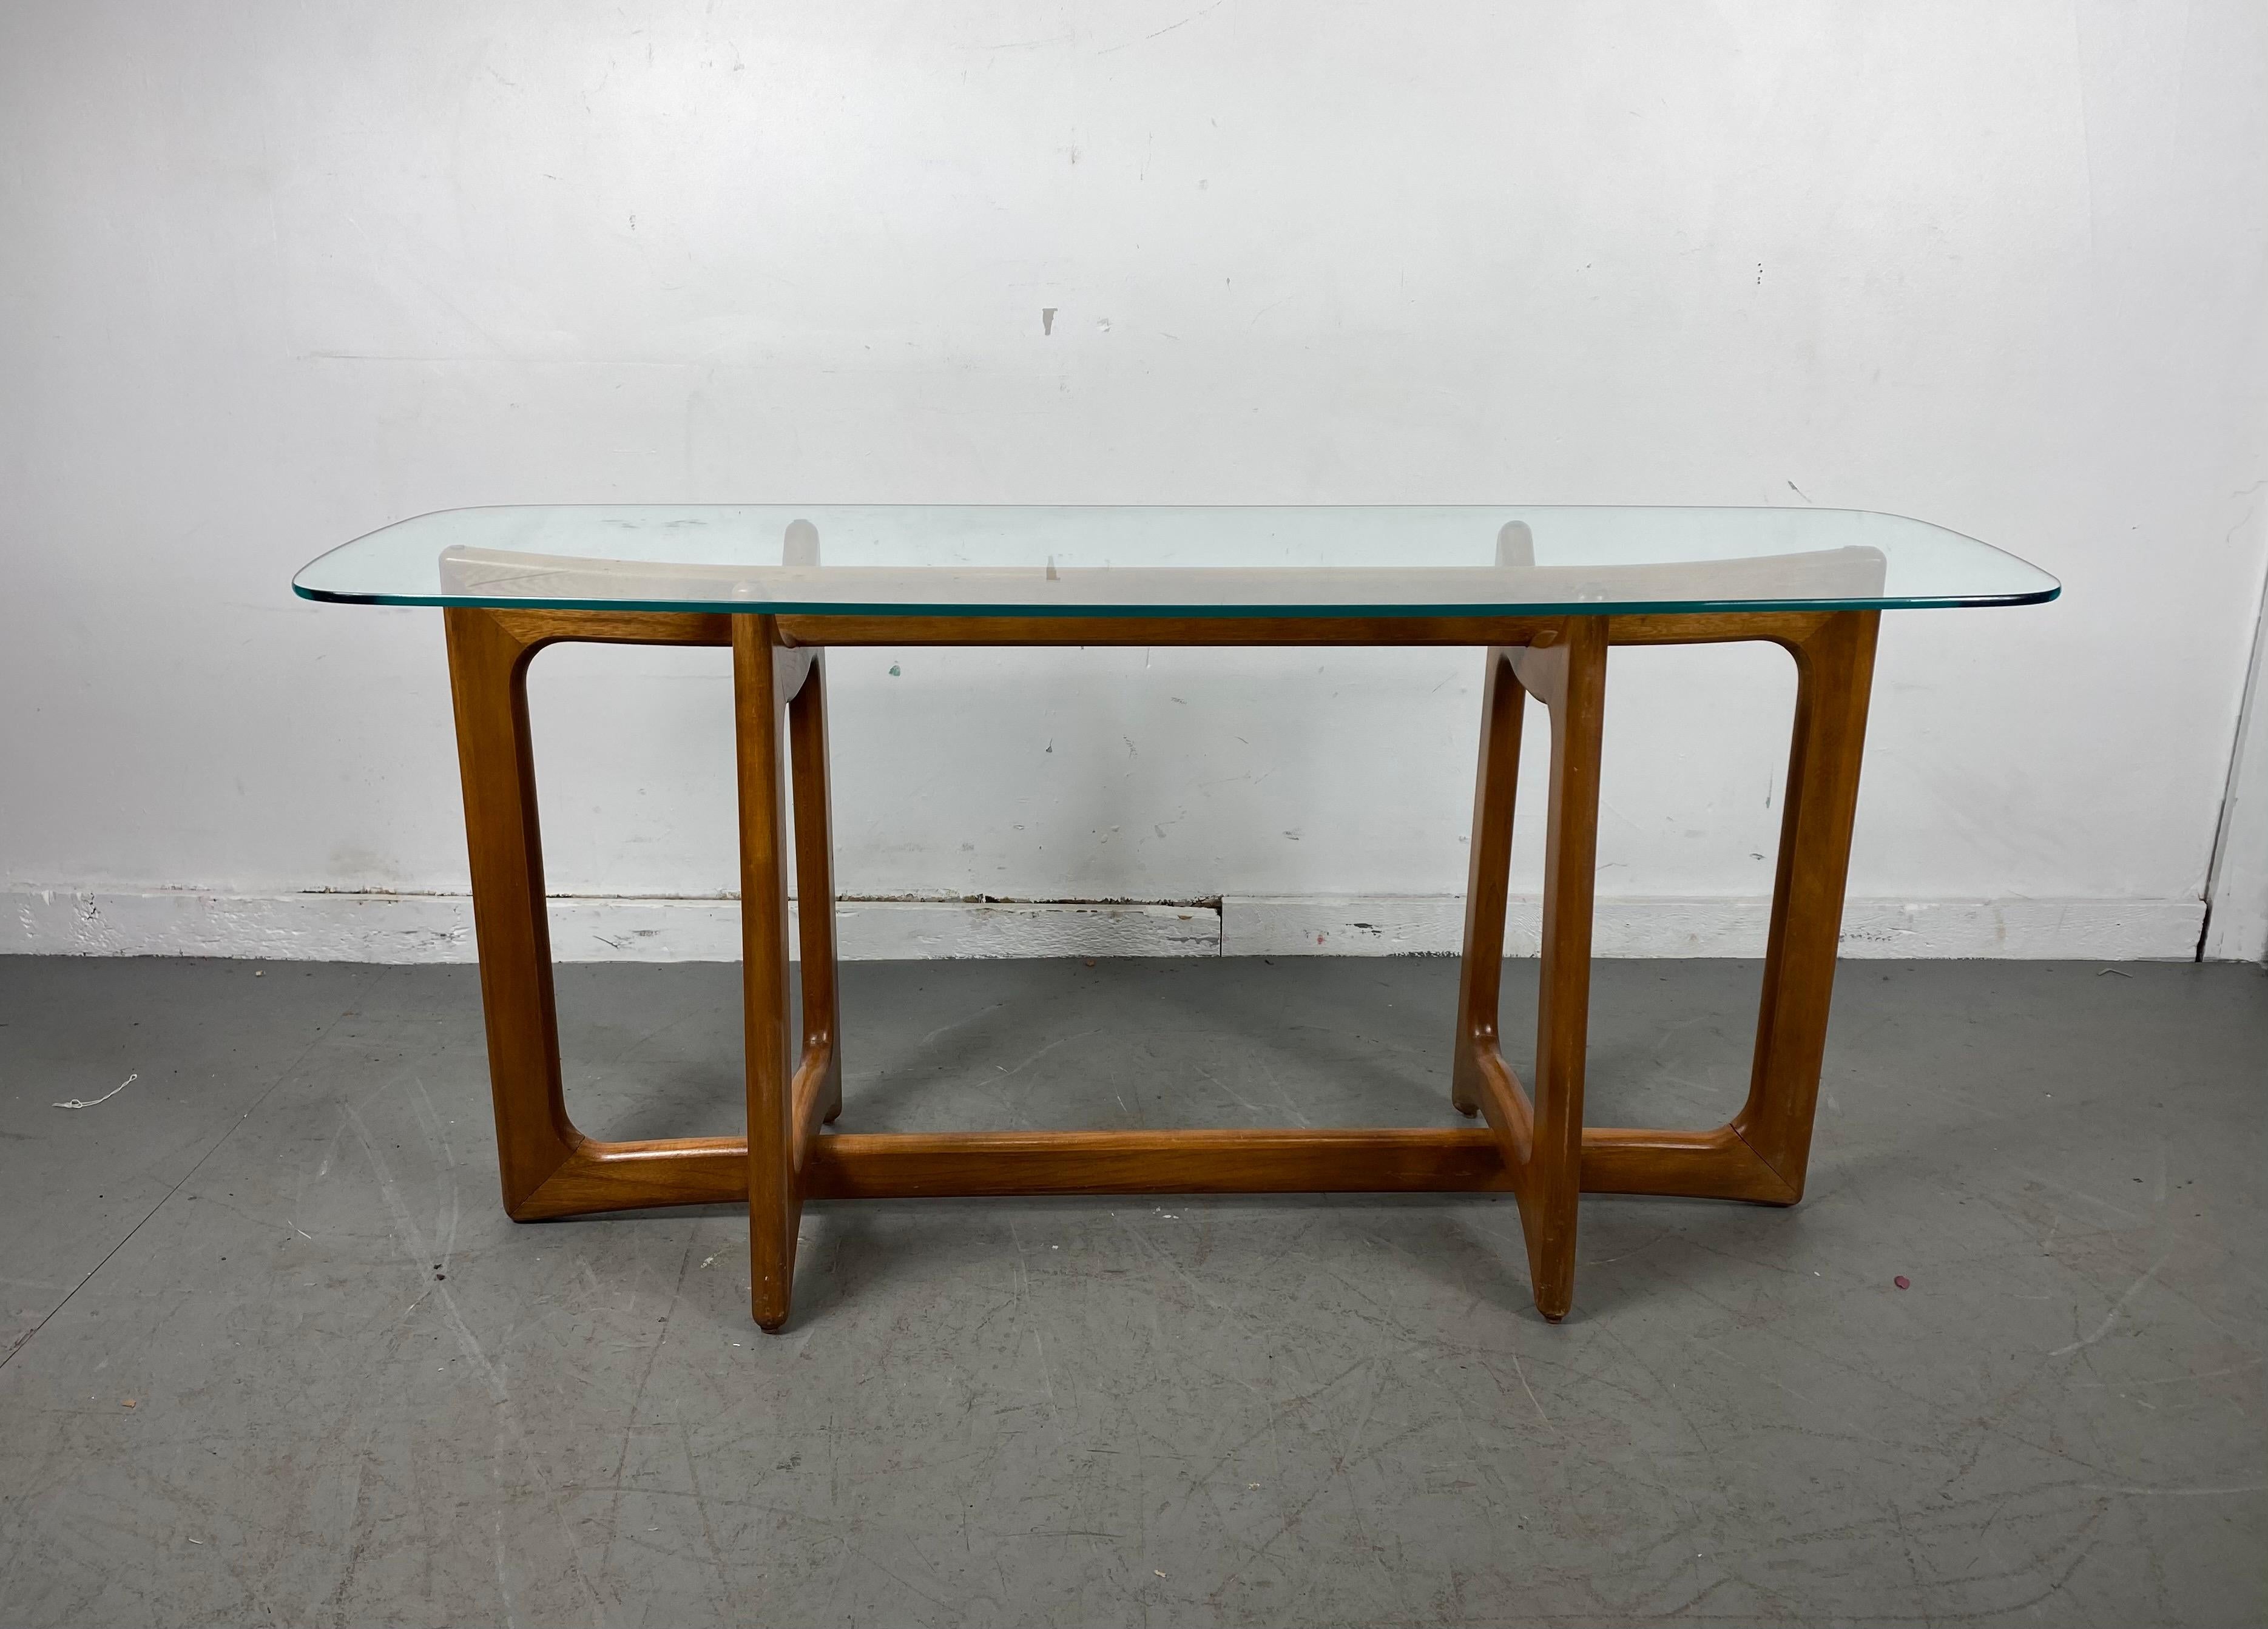 Amazing sculptural walnut and glass top console table designed by Adrian Pearsall, Classic midcentury modernist design, wonderful color, patina, 16 fit seamlessly into any modern, contemporary. Eclectic environment, hand delivery avail to New York